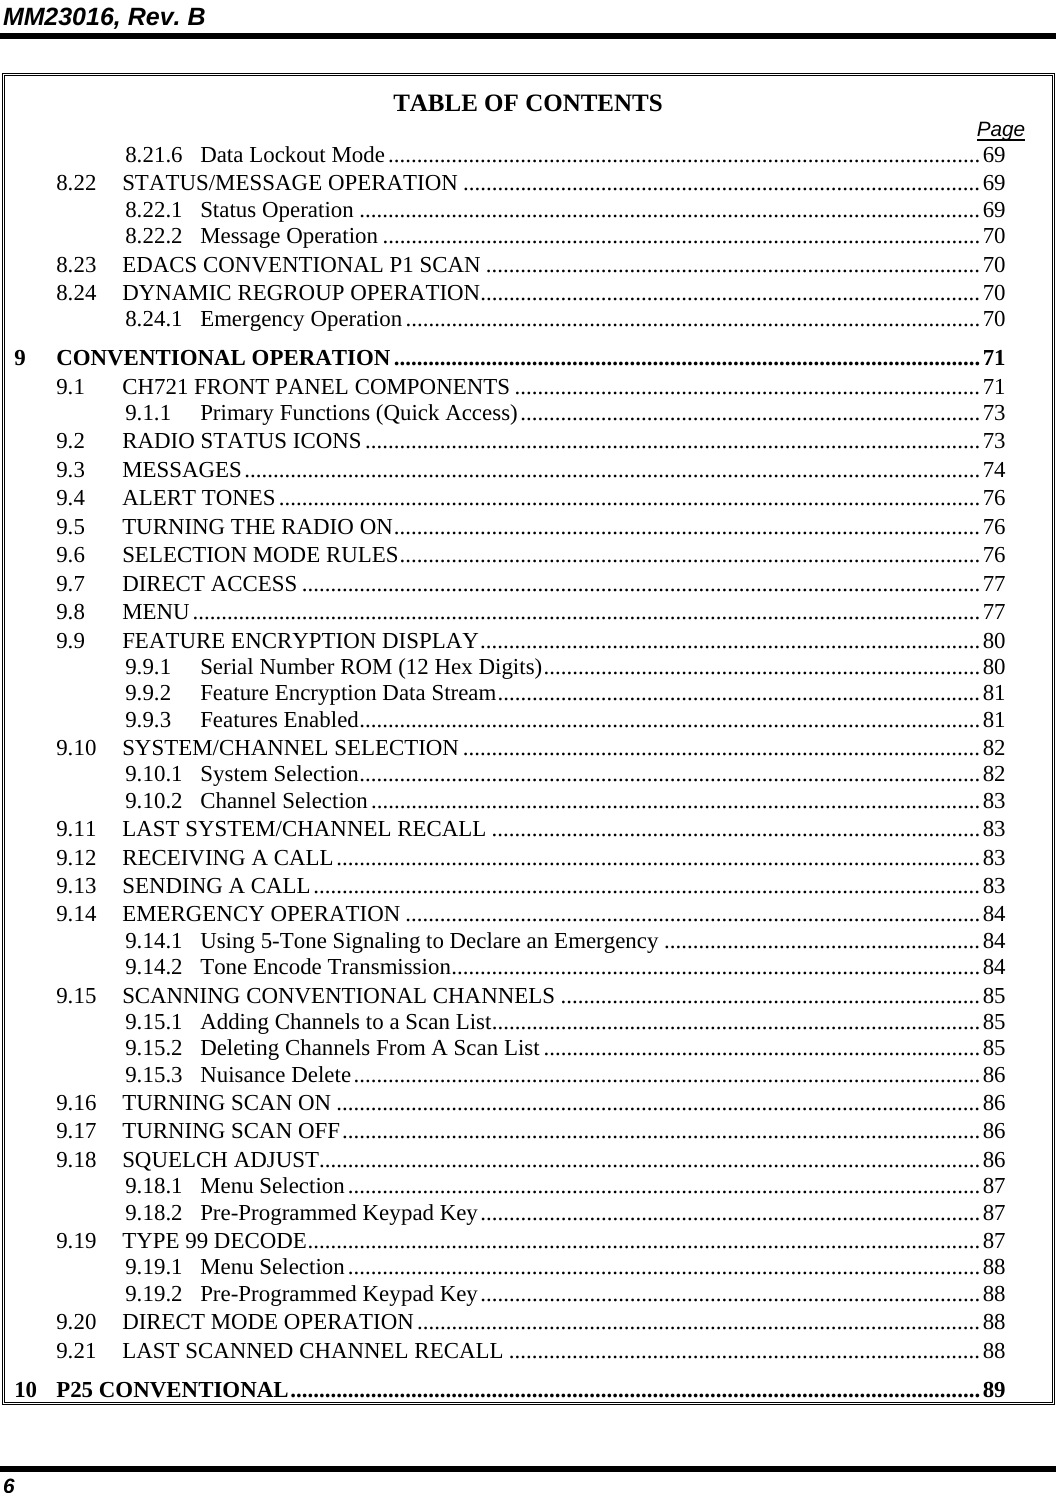 MM23016, Rev. B 6 TABLE OF CONTENTS  Page 8.21.6 Data Lockout Mode.......................................................................................................69 8.22 STATUS/MESSAGE OPERATION ..........................................................................................69 8.22.1 Status Operation ............................................................................................................69 8.22.2 Message Operation ........................................................................................................70 8.23 EDACS CONVENTIONAL P1 SCAN ......................................................................................70 8.24 DYNAMIC REGROUP OPERATION.......................................................................................70 8.24.1 Emergency Operation....................................................................................................70 9 CONVENTIONAL OPERATION......................................................................................................71 9.1 CH721 FRONT PANEL COMPONENTS .................................................................................71 9.1.1 Primary Functions (Quick Access)................................................................................73 9.2 RADIO STATUS ICONS...........................................................................................................73 9.3 MESSAGES................................................................................................................................74 9.4 ALERT TONES..........................................................................................................................76 9.5 TURNING THE RADIO ON......................................................................................................76 9.6 SELECTION MODE RULES.....................................................................................................76 9.7 DIRECT ACCESS ......................................................................................................................77 9.8 MENU.........................................................................................................................................77 9.9 FEATURE ENCRYPTION DISPLAY.......................................................................................80 9.9.1 Serial Number ROM (12 Hex Digits)............................................................................80 9.9.2 Feature Encryption Data Stream....................................................................................81 9.9.3 Features Enabled............................................................................................................81 9.10 SYSTEM/CHANNEL SELECTION ..........................................................................................82 9.10.1 System Selection............................................................................................................82 9.10.2 Channel Selection..........................................................................................................83 9.11 LAST SYSTEM/CHANNEL RECALL .....................................................................................83 9.12 RECEIVING A CALL................................................................................................................83 9.13 SENDING A CALL....................................................................................................................83 9.14 EMERGENCY OPERATION ....................................................................................................84 9.14.1 Using 5-Tone Signaling to Declare an Emergency .......................................................84 9.14.2 Tone Encode Transmission............................................................................................84 9.15 SCANNING CONVENTIONAL CHANNELS .........................................................................85 9.15.1 Adding Channels to a Scan List.....................................................................................85 9.15.2 Deleting Channels From A Scan List............................................................................85 9.15.3 Nuisance Delete.............................................................................................................86 9.16 TURNING SCAN ON ................................................................................................................86 9.17 TURNING SCAN OFF...............................................................................................................86 9.18 SQUELCH ADJUST...................................................................................................................86 9.18.1 Menu Selection..............................................................................................................87 9.18.2 Pre-Programmed Keypad Key.......................................................................................87 9.19 TYPE 99 DECODE.....................................................................................................................87 9.19.1 Menu Selection..............................................................................................................88 9.19.2 Pre-Programmed Keypad Key.......................................................................................88 9.20 DIRECT MODE OPERATION..................................................................................................88 9.21 LAST SCANNED CHANNEL RECALL ..................................................................................88 10 P25 CONVENTIONAL........................................................................................................................89 